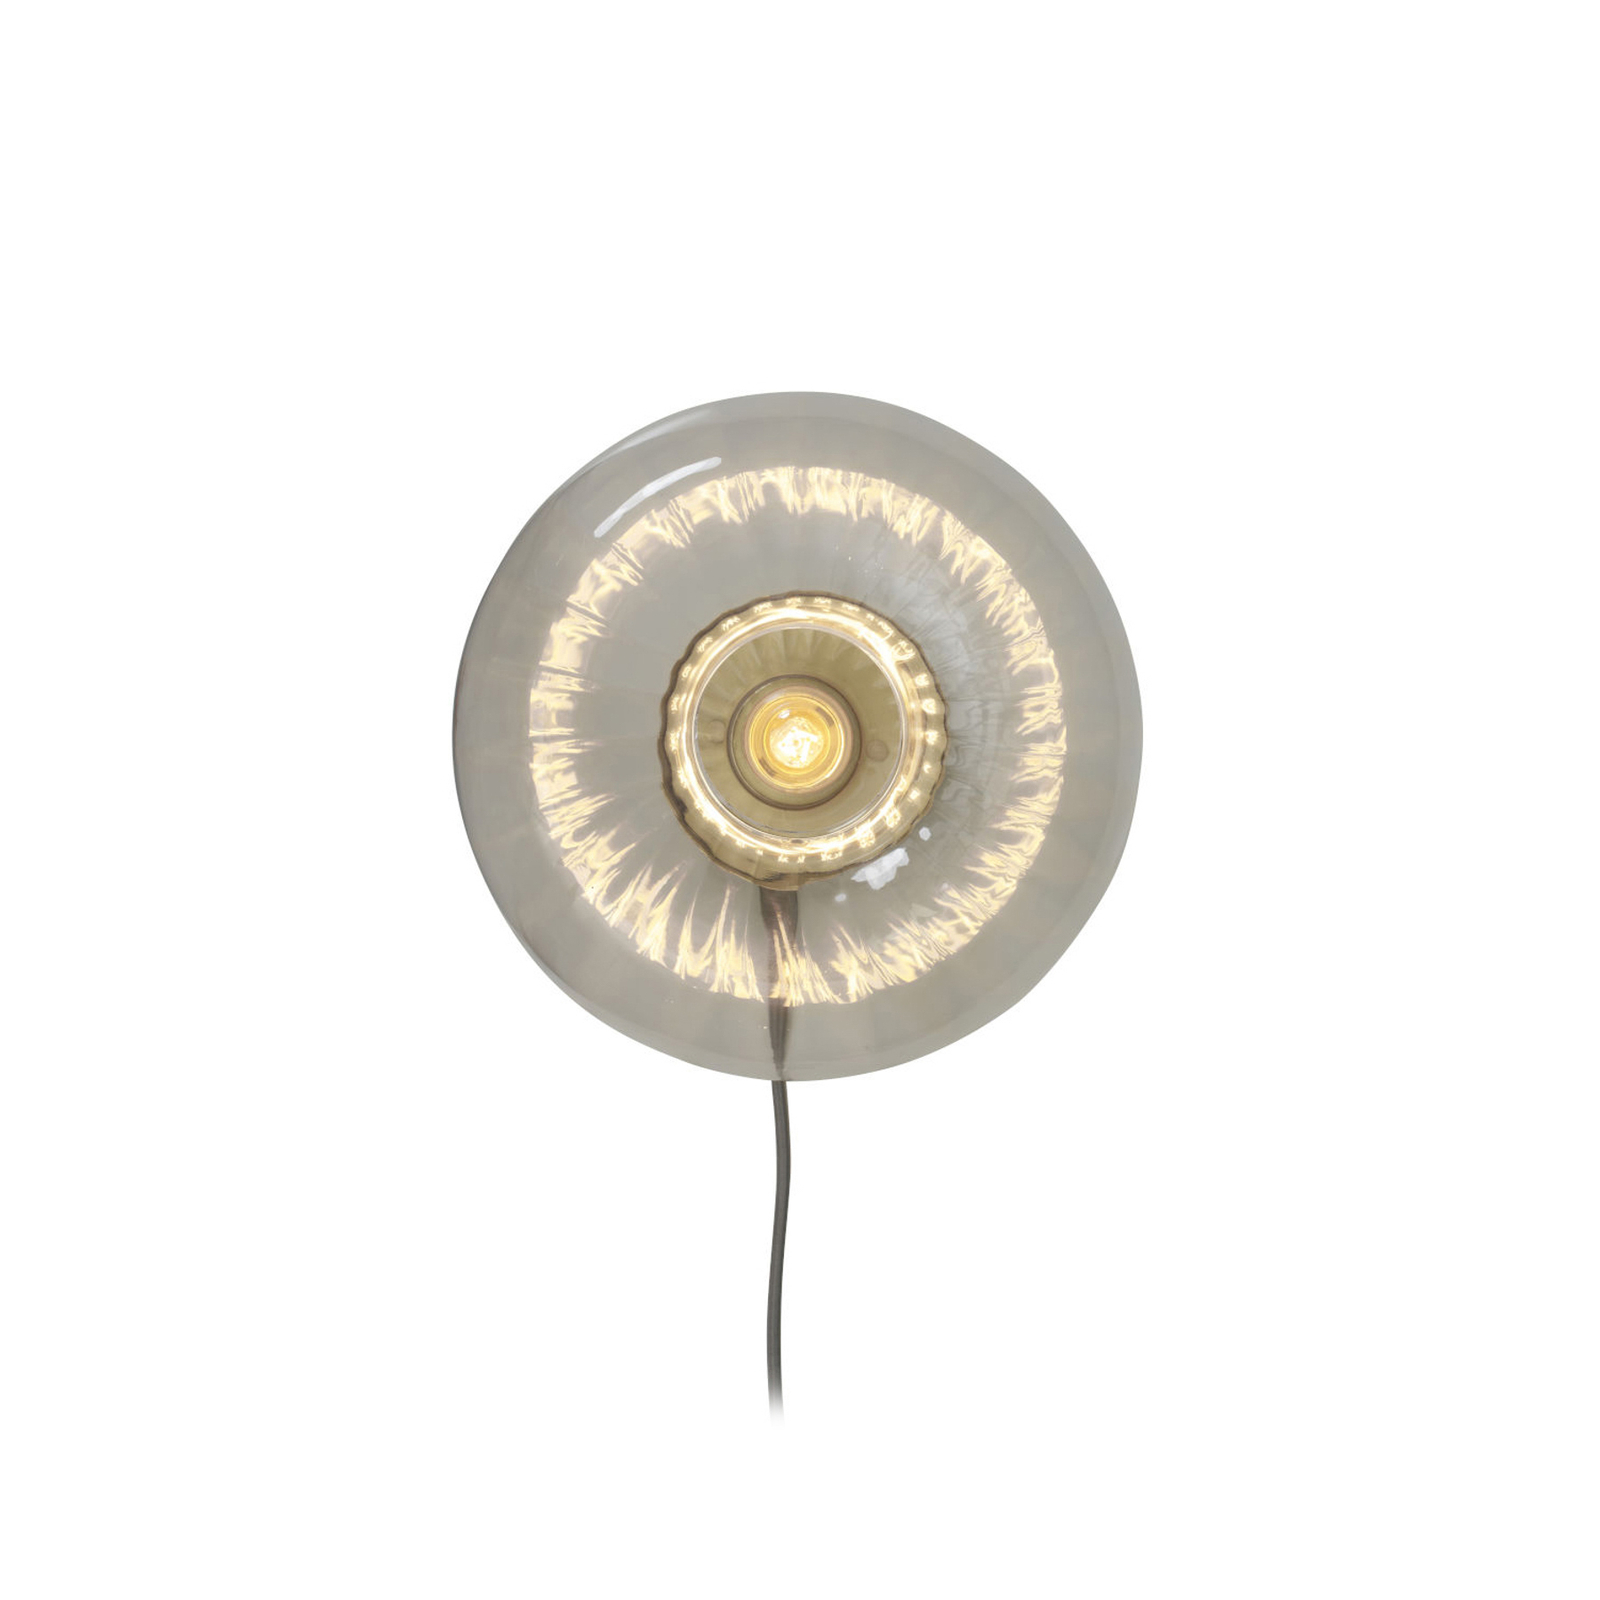 It’s about RoMi Brussels wall light gold/clear